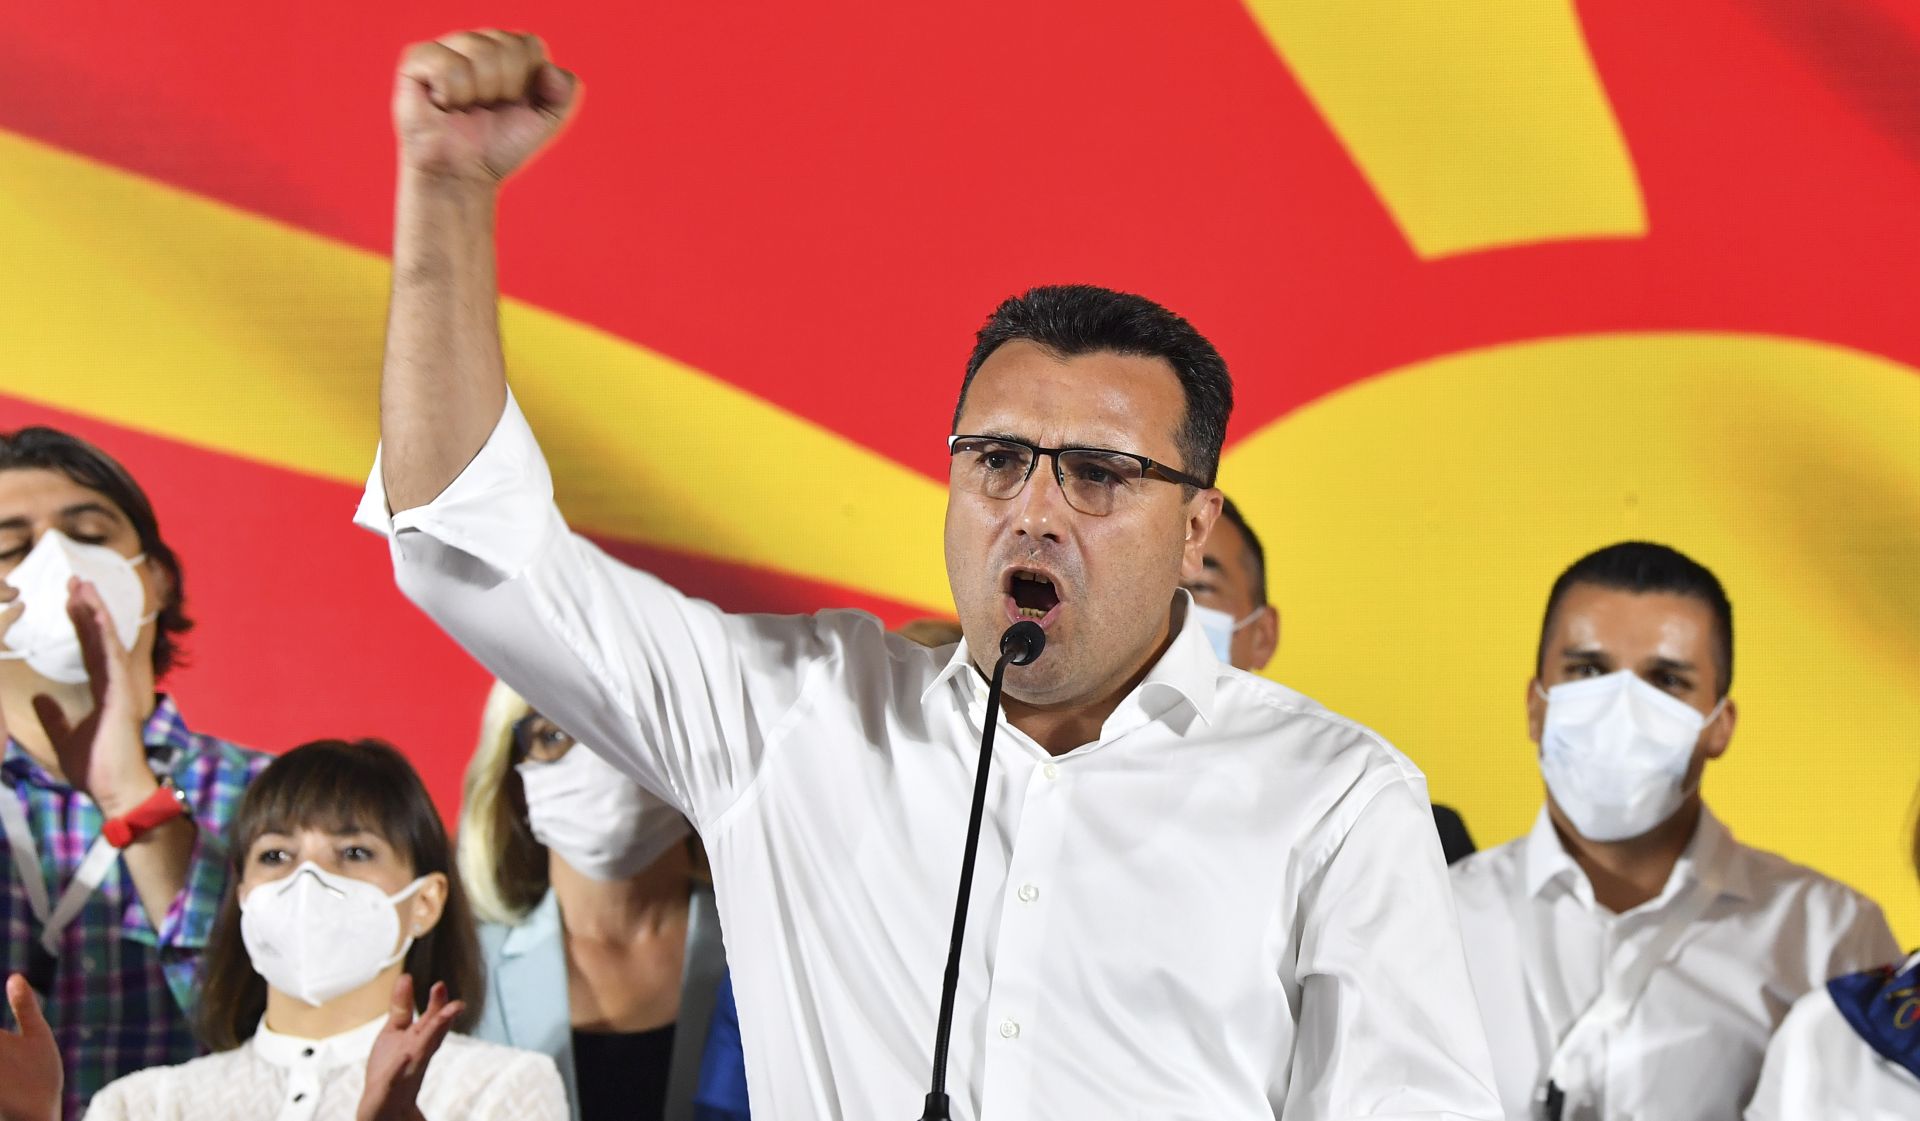 epa08548711 Leader of the ruling SDSM party Zoran Zaev (C) celebrates victory in the early Parliamentary election in Skopje, Republic of North Macedonia, 16 July 2020. Almost 51 percent of the 1.8 million Macedonians voted in early Parliamentary elections.  EPA/GEORGI LICOVSKI